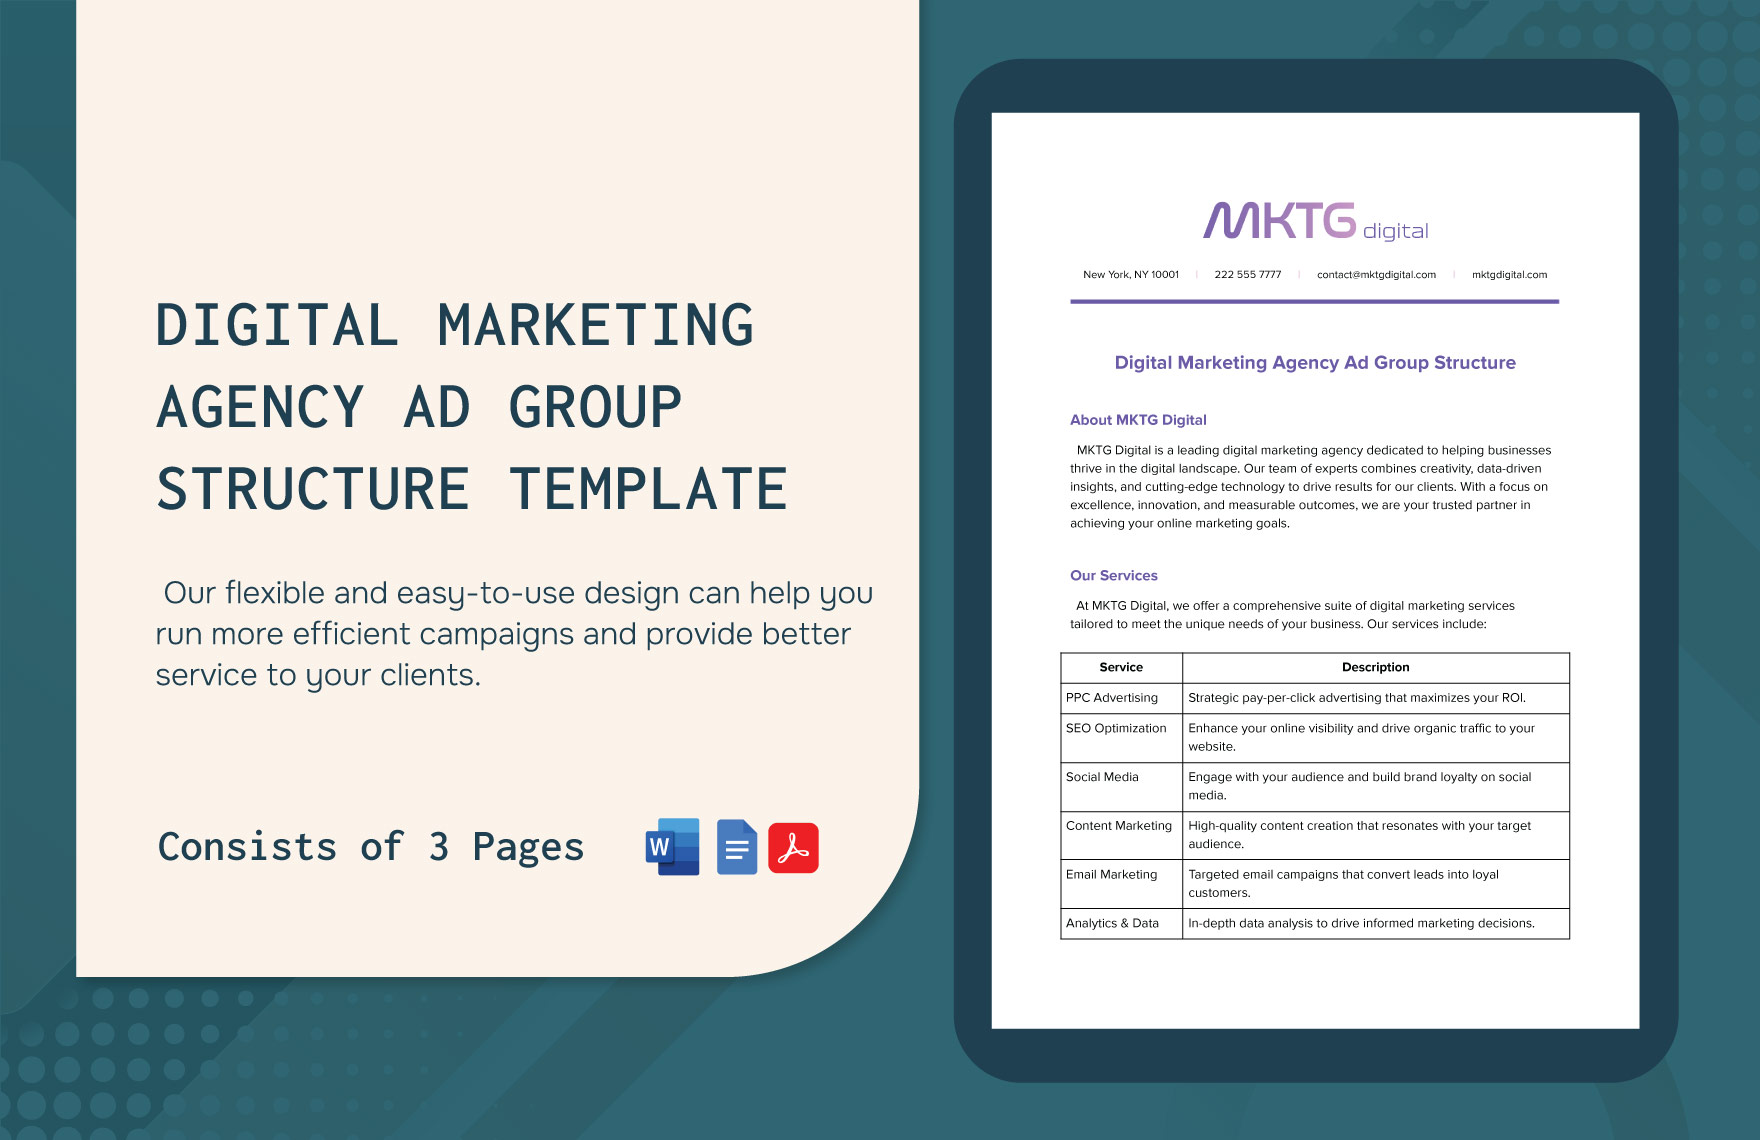 Digital Marketing Agency Ad Group Structure Template